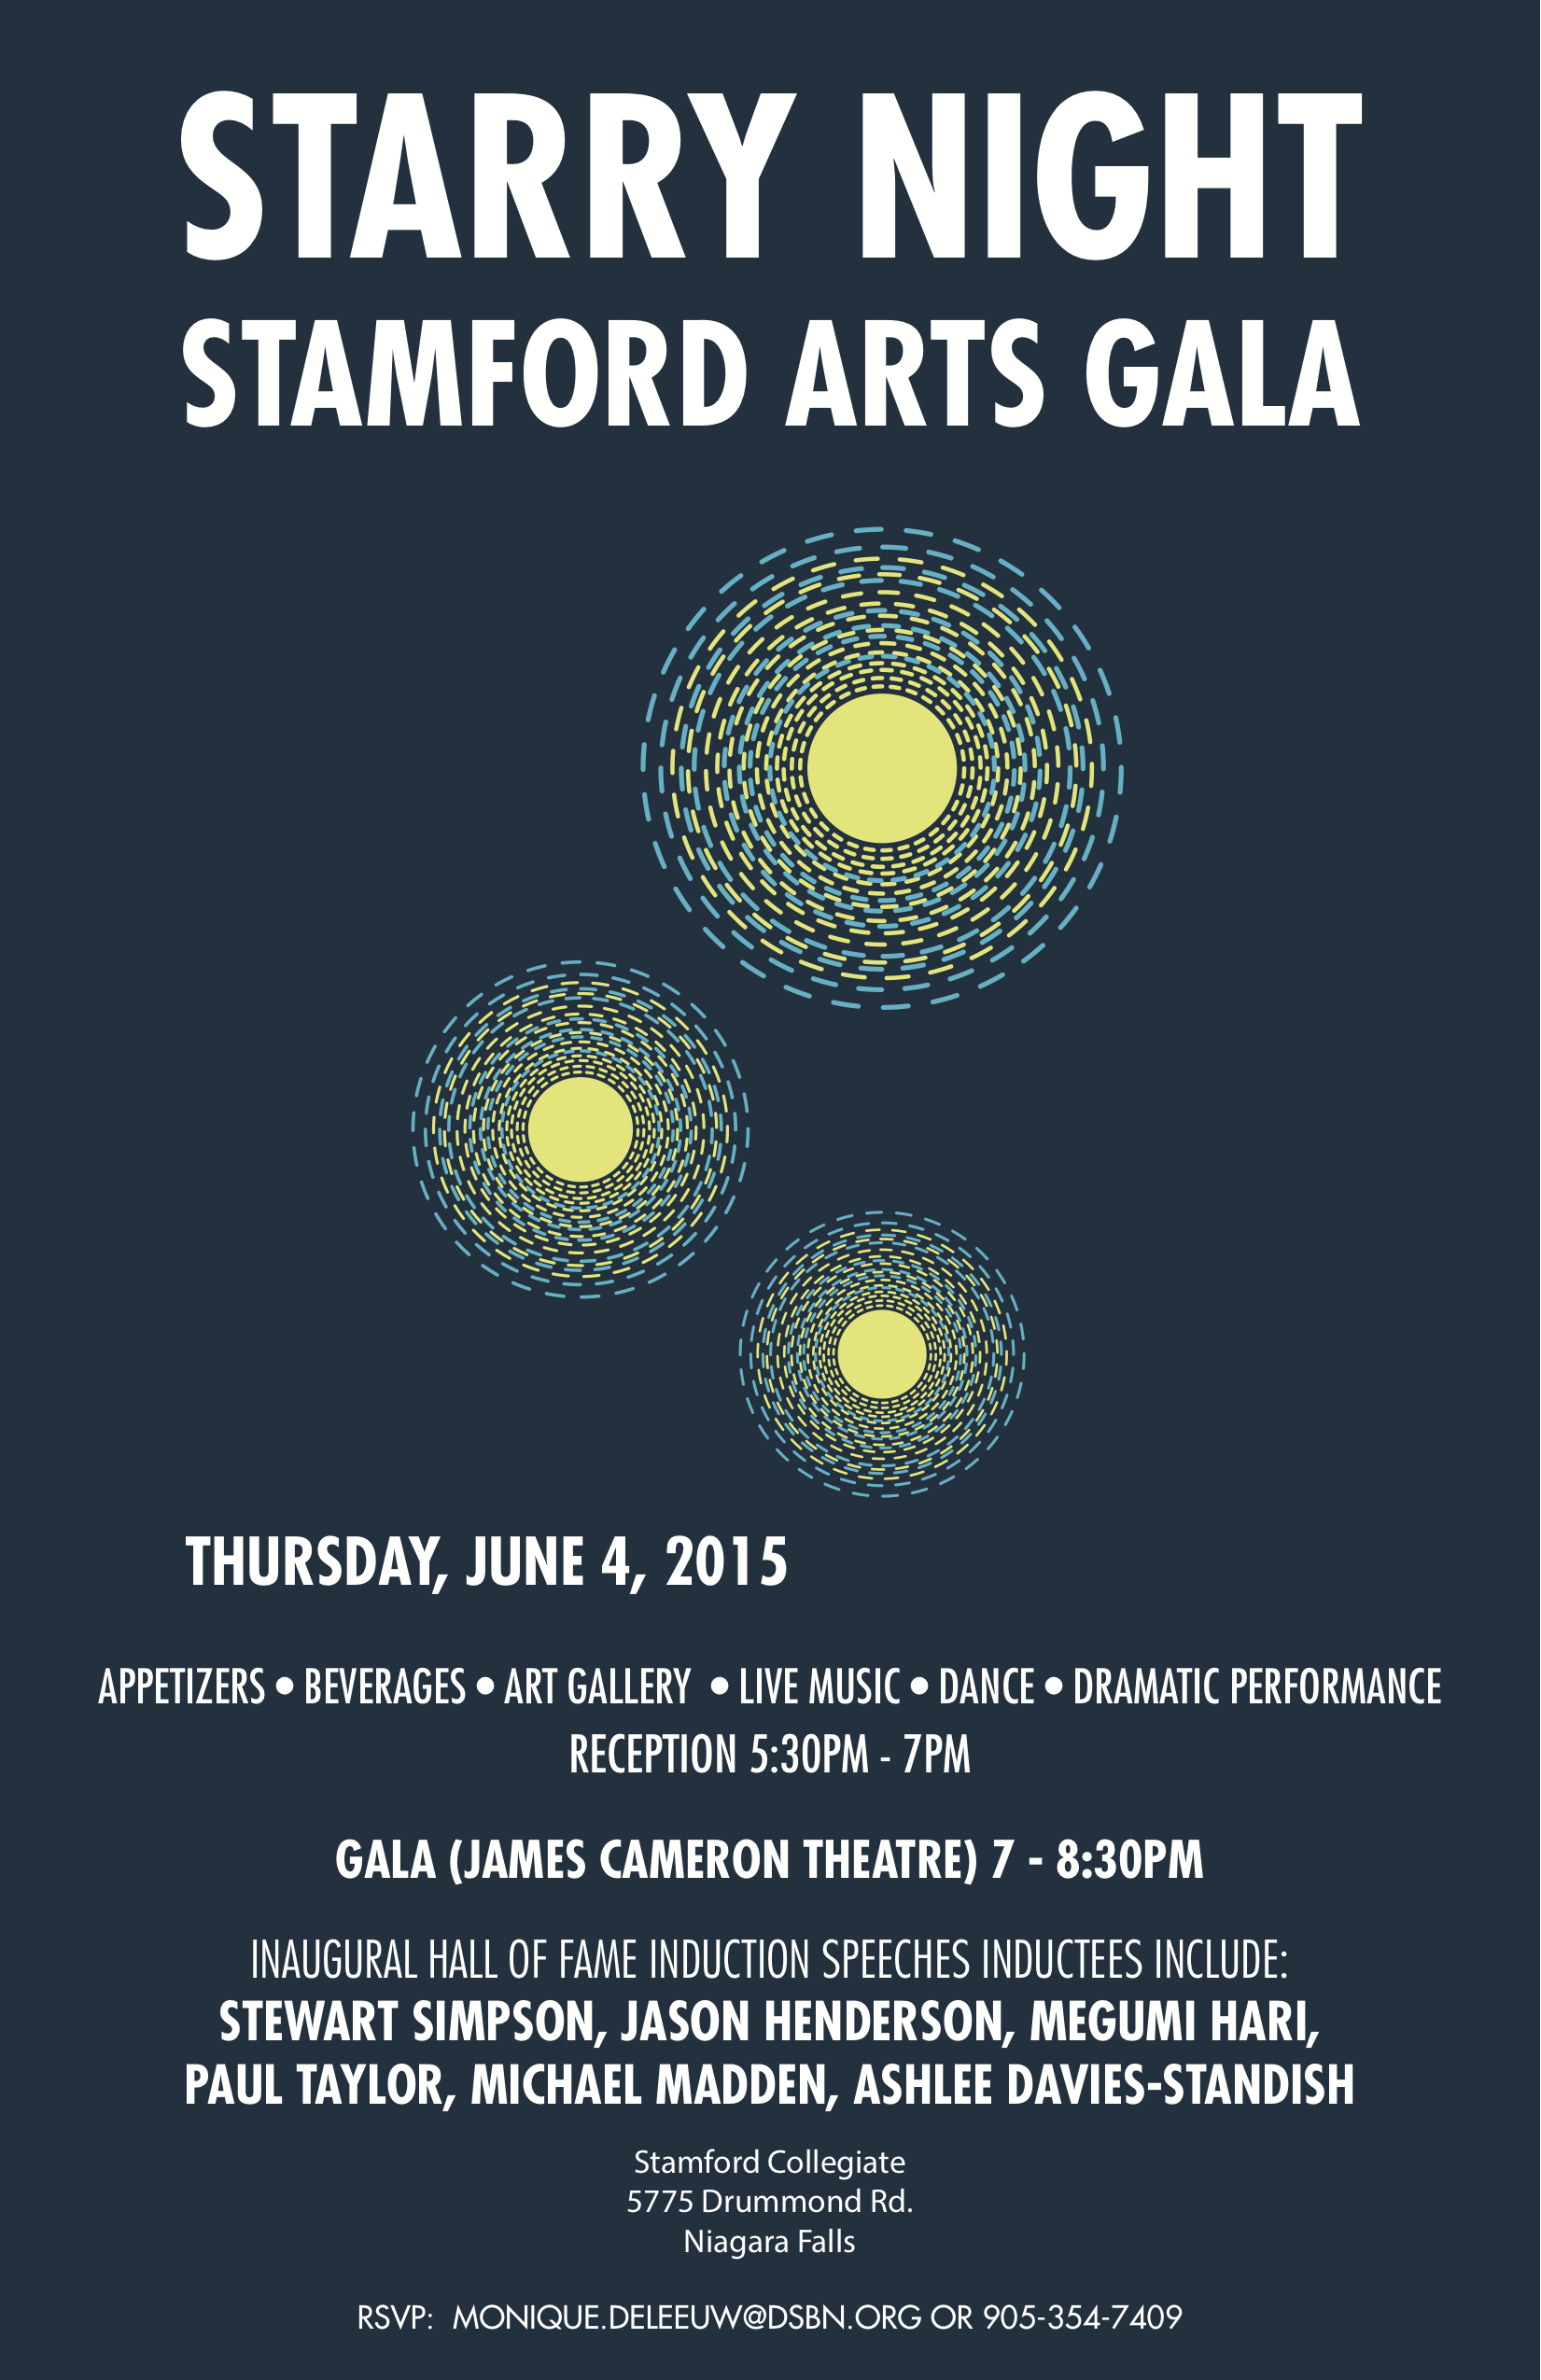 Starry Night - Stamford's Arts Gala - Don't Miss It This Thursday!!